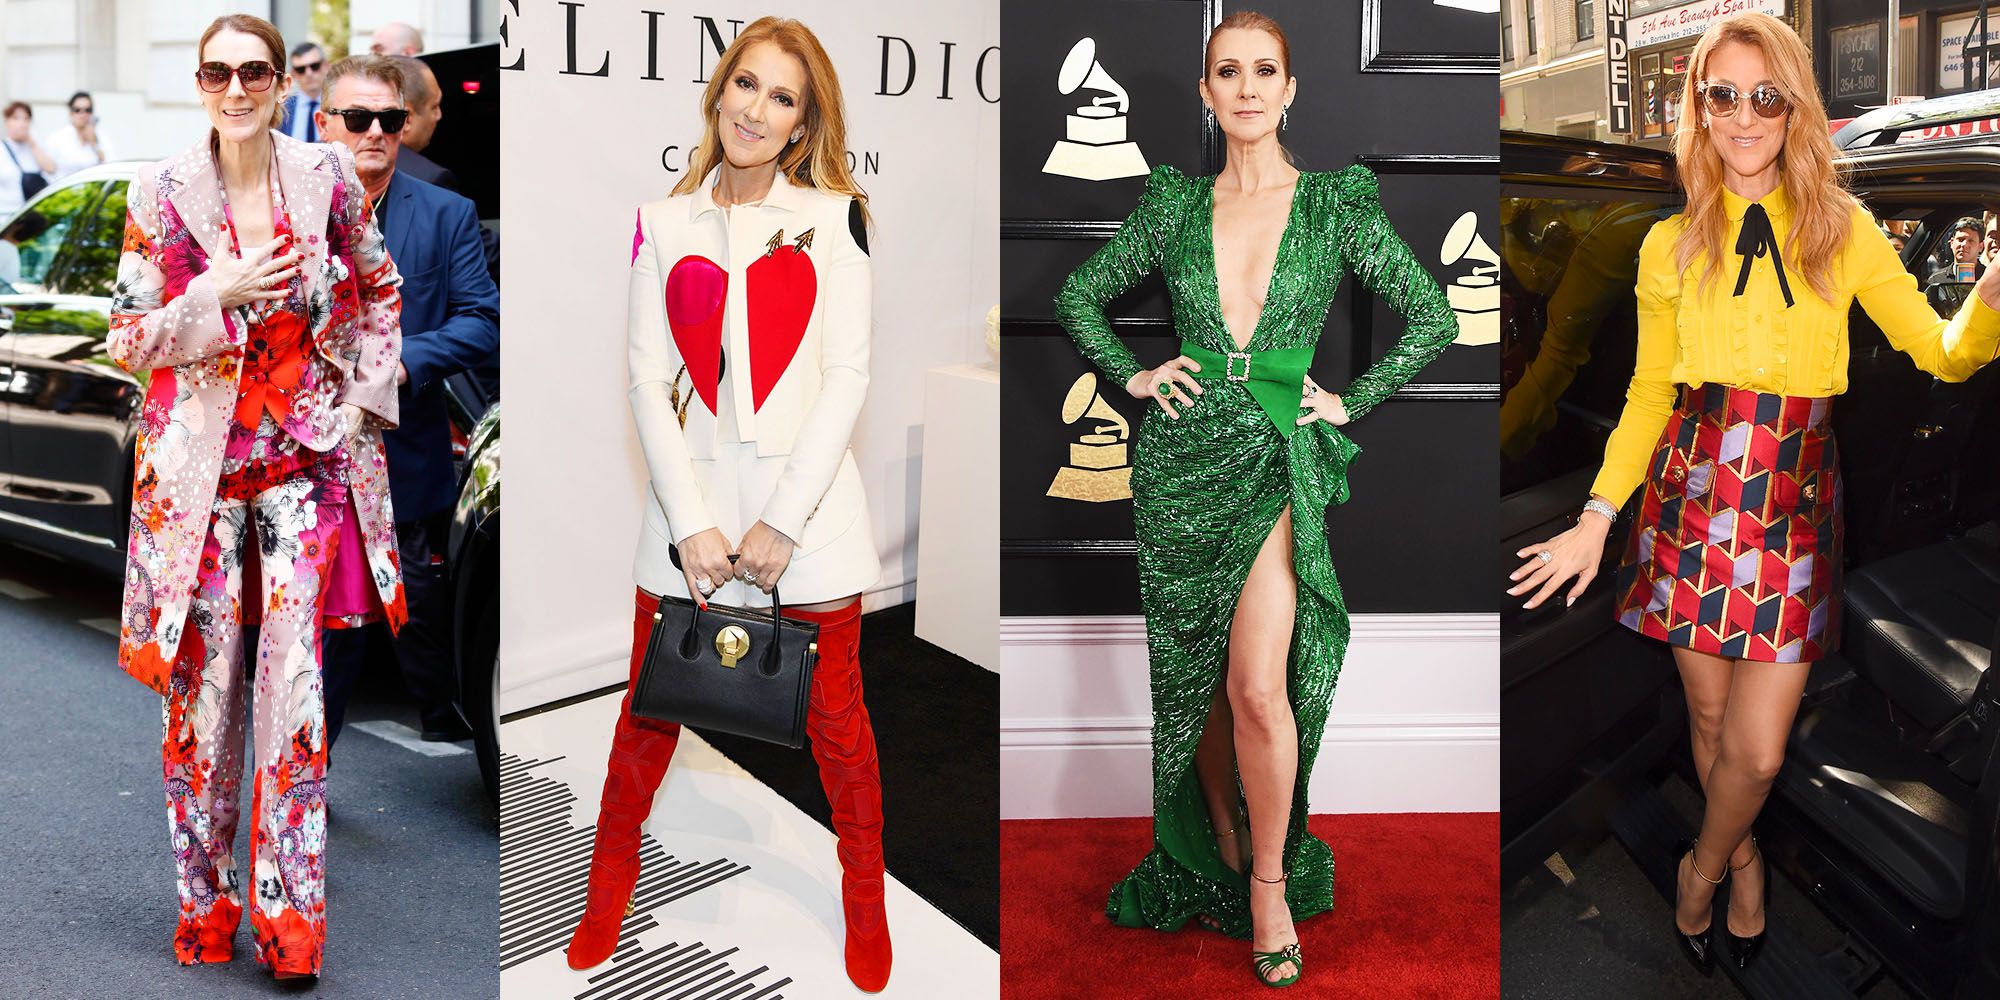 Celine Dion Style - Celine Dion Fashion Photos and Best Outfits